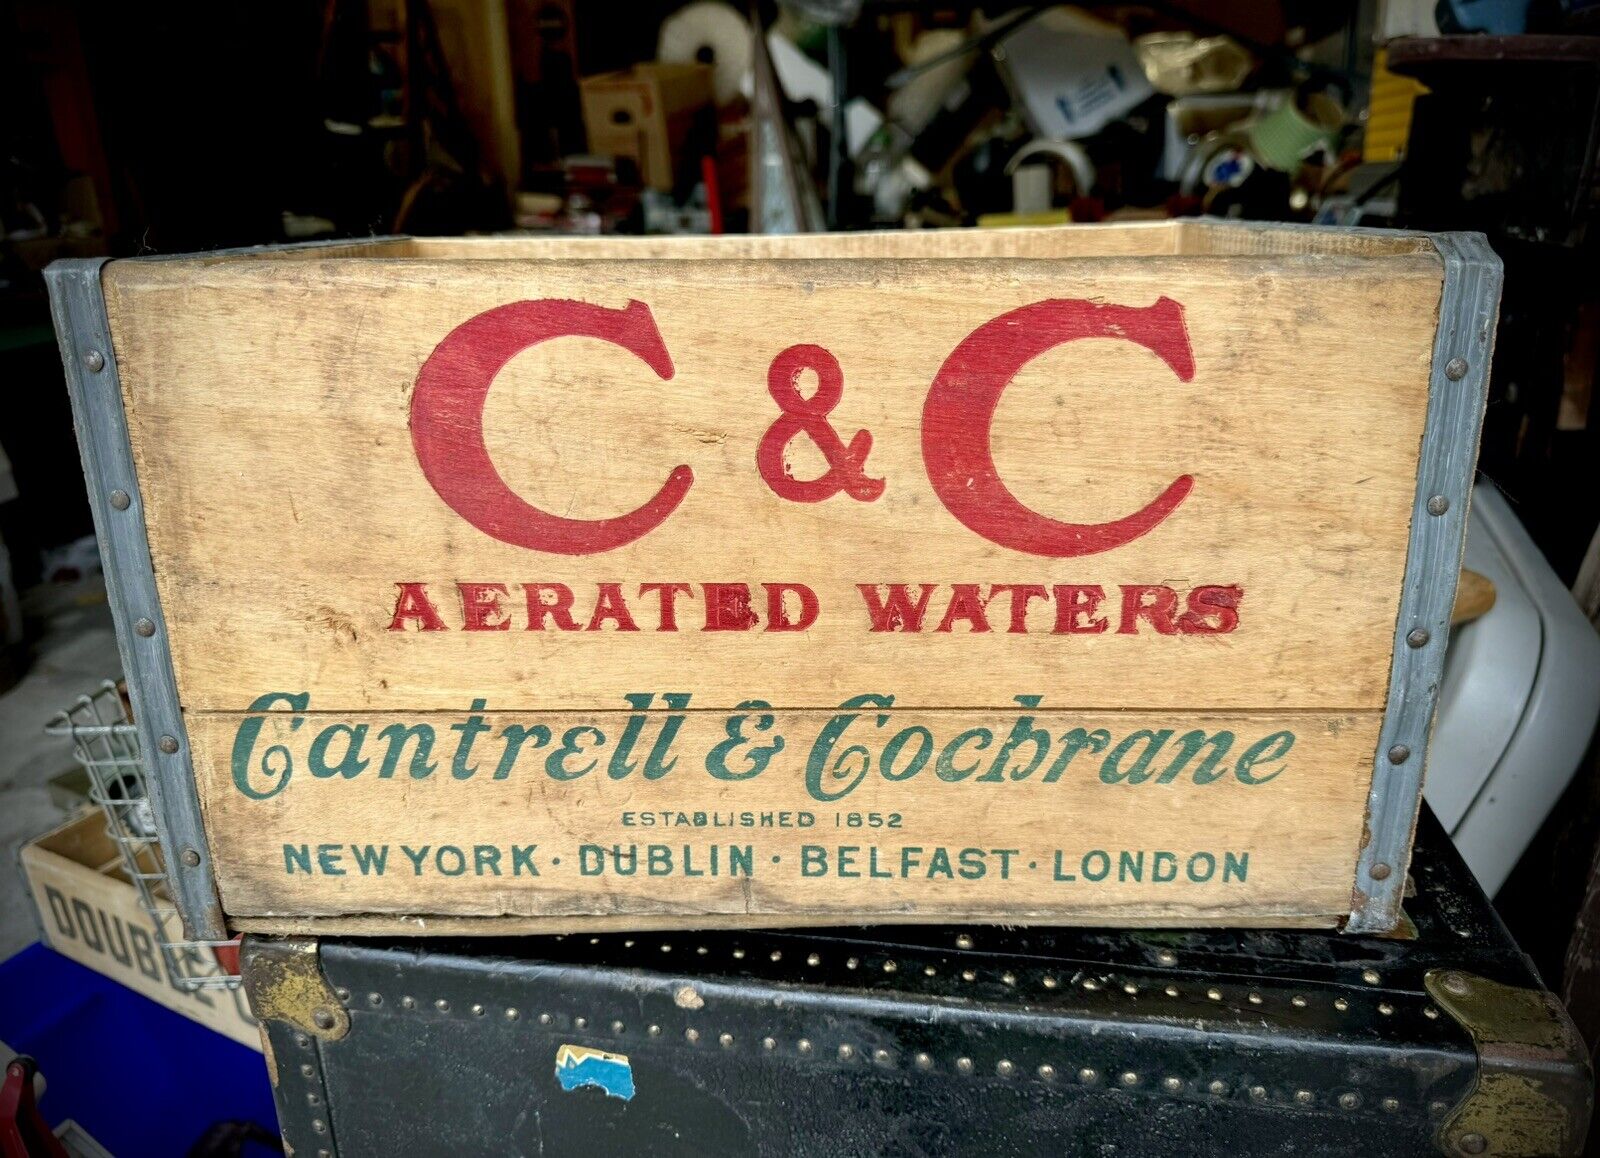 Rare Vintage C&C Aerated Waters Cantrell & Cochrane Wood Crate Box NYC London